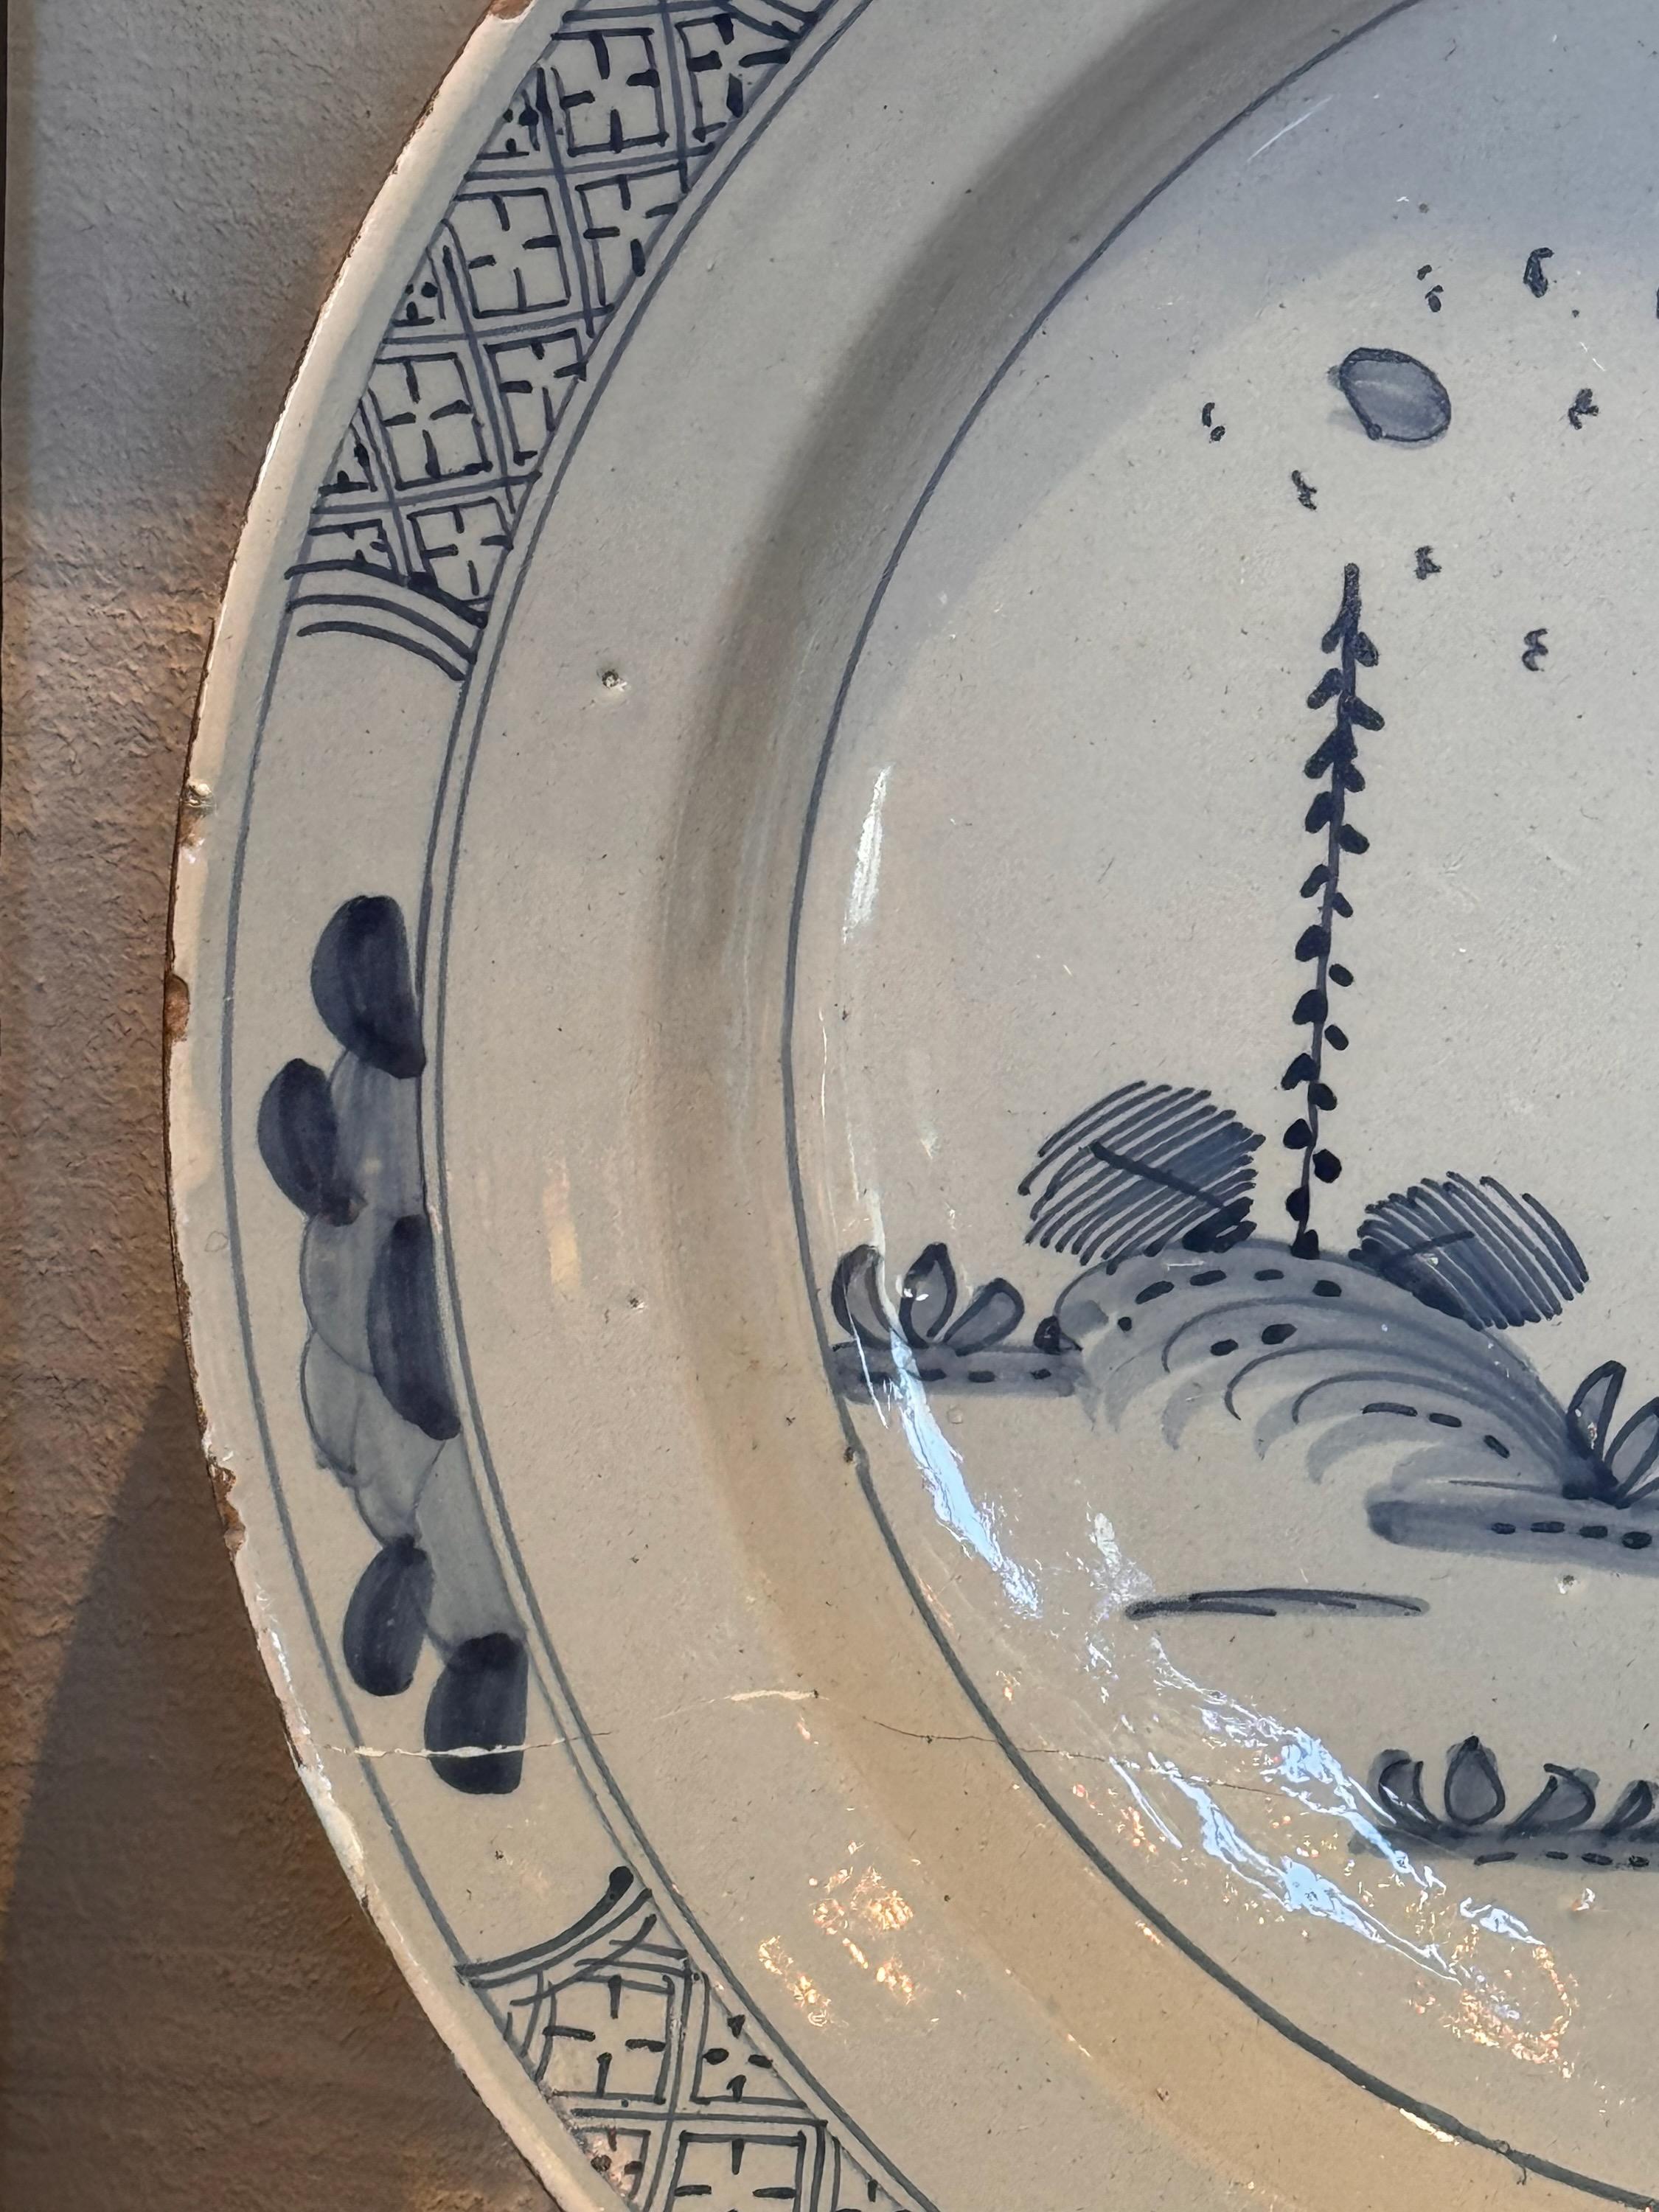 18th Century Delft Charger For Sale 4